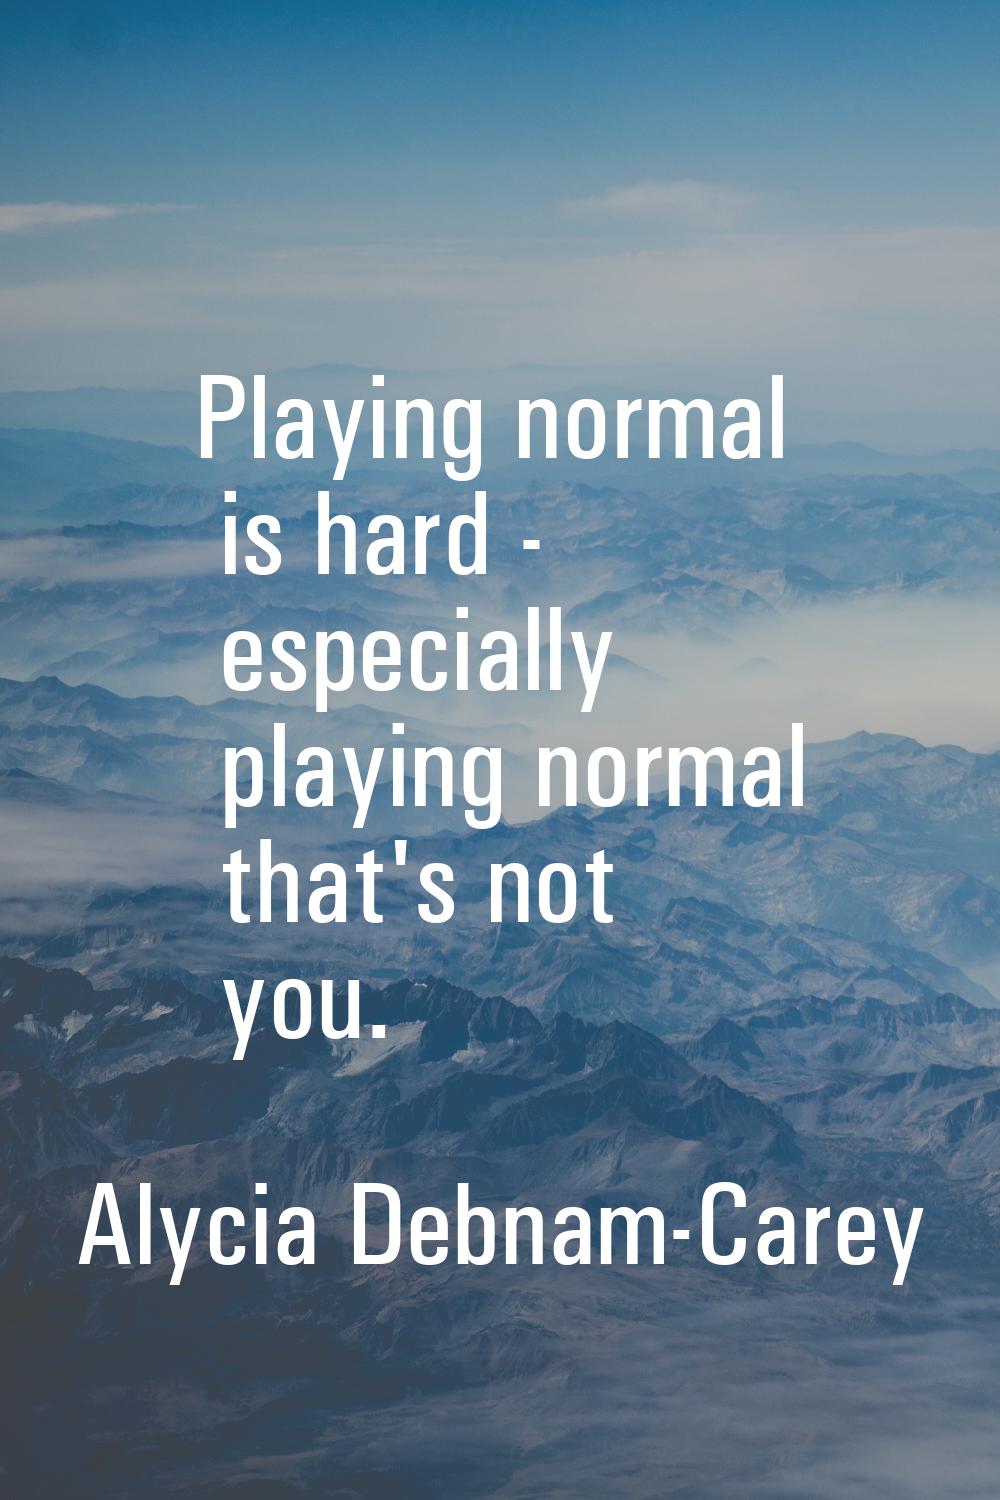 Playing normal is hard - especially playing normal that's not you.